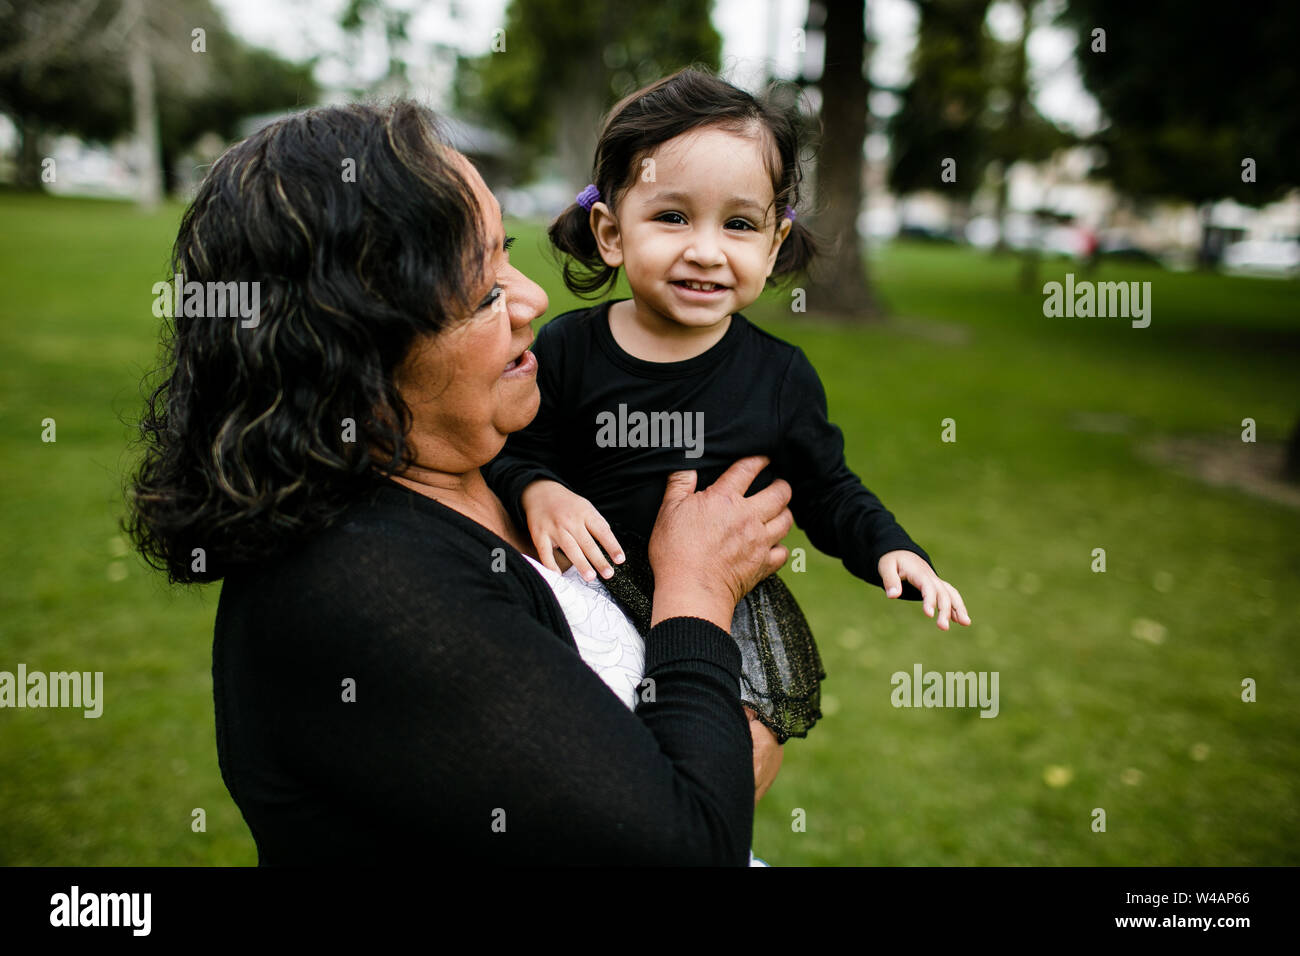 Grandmother & granddaughter smiling and hugging Stock Photo